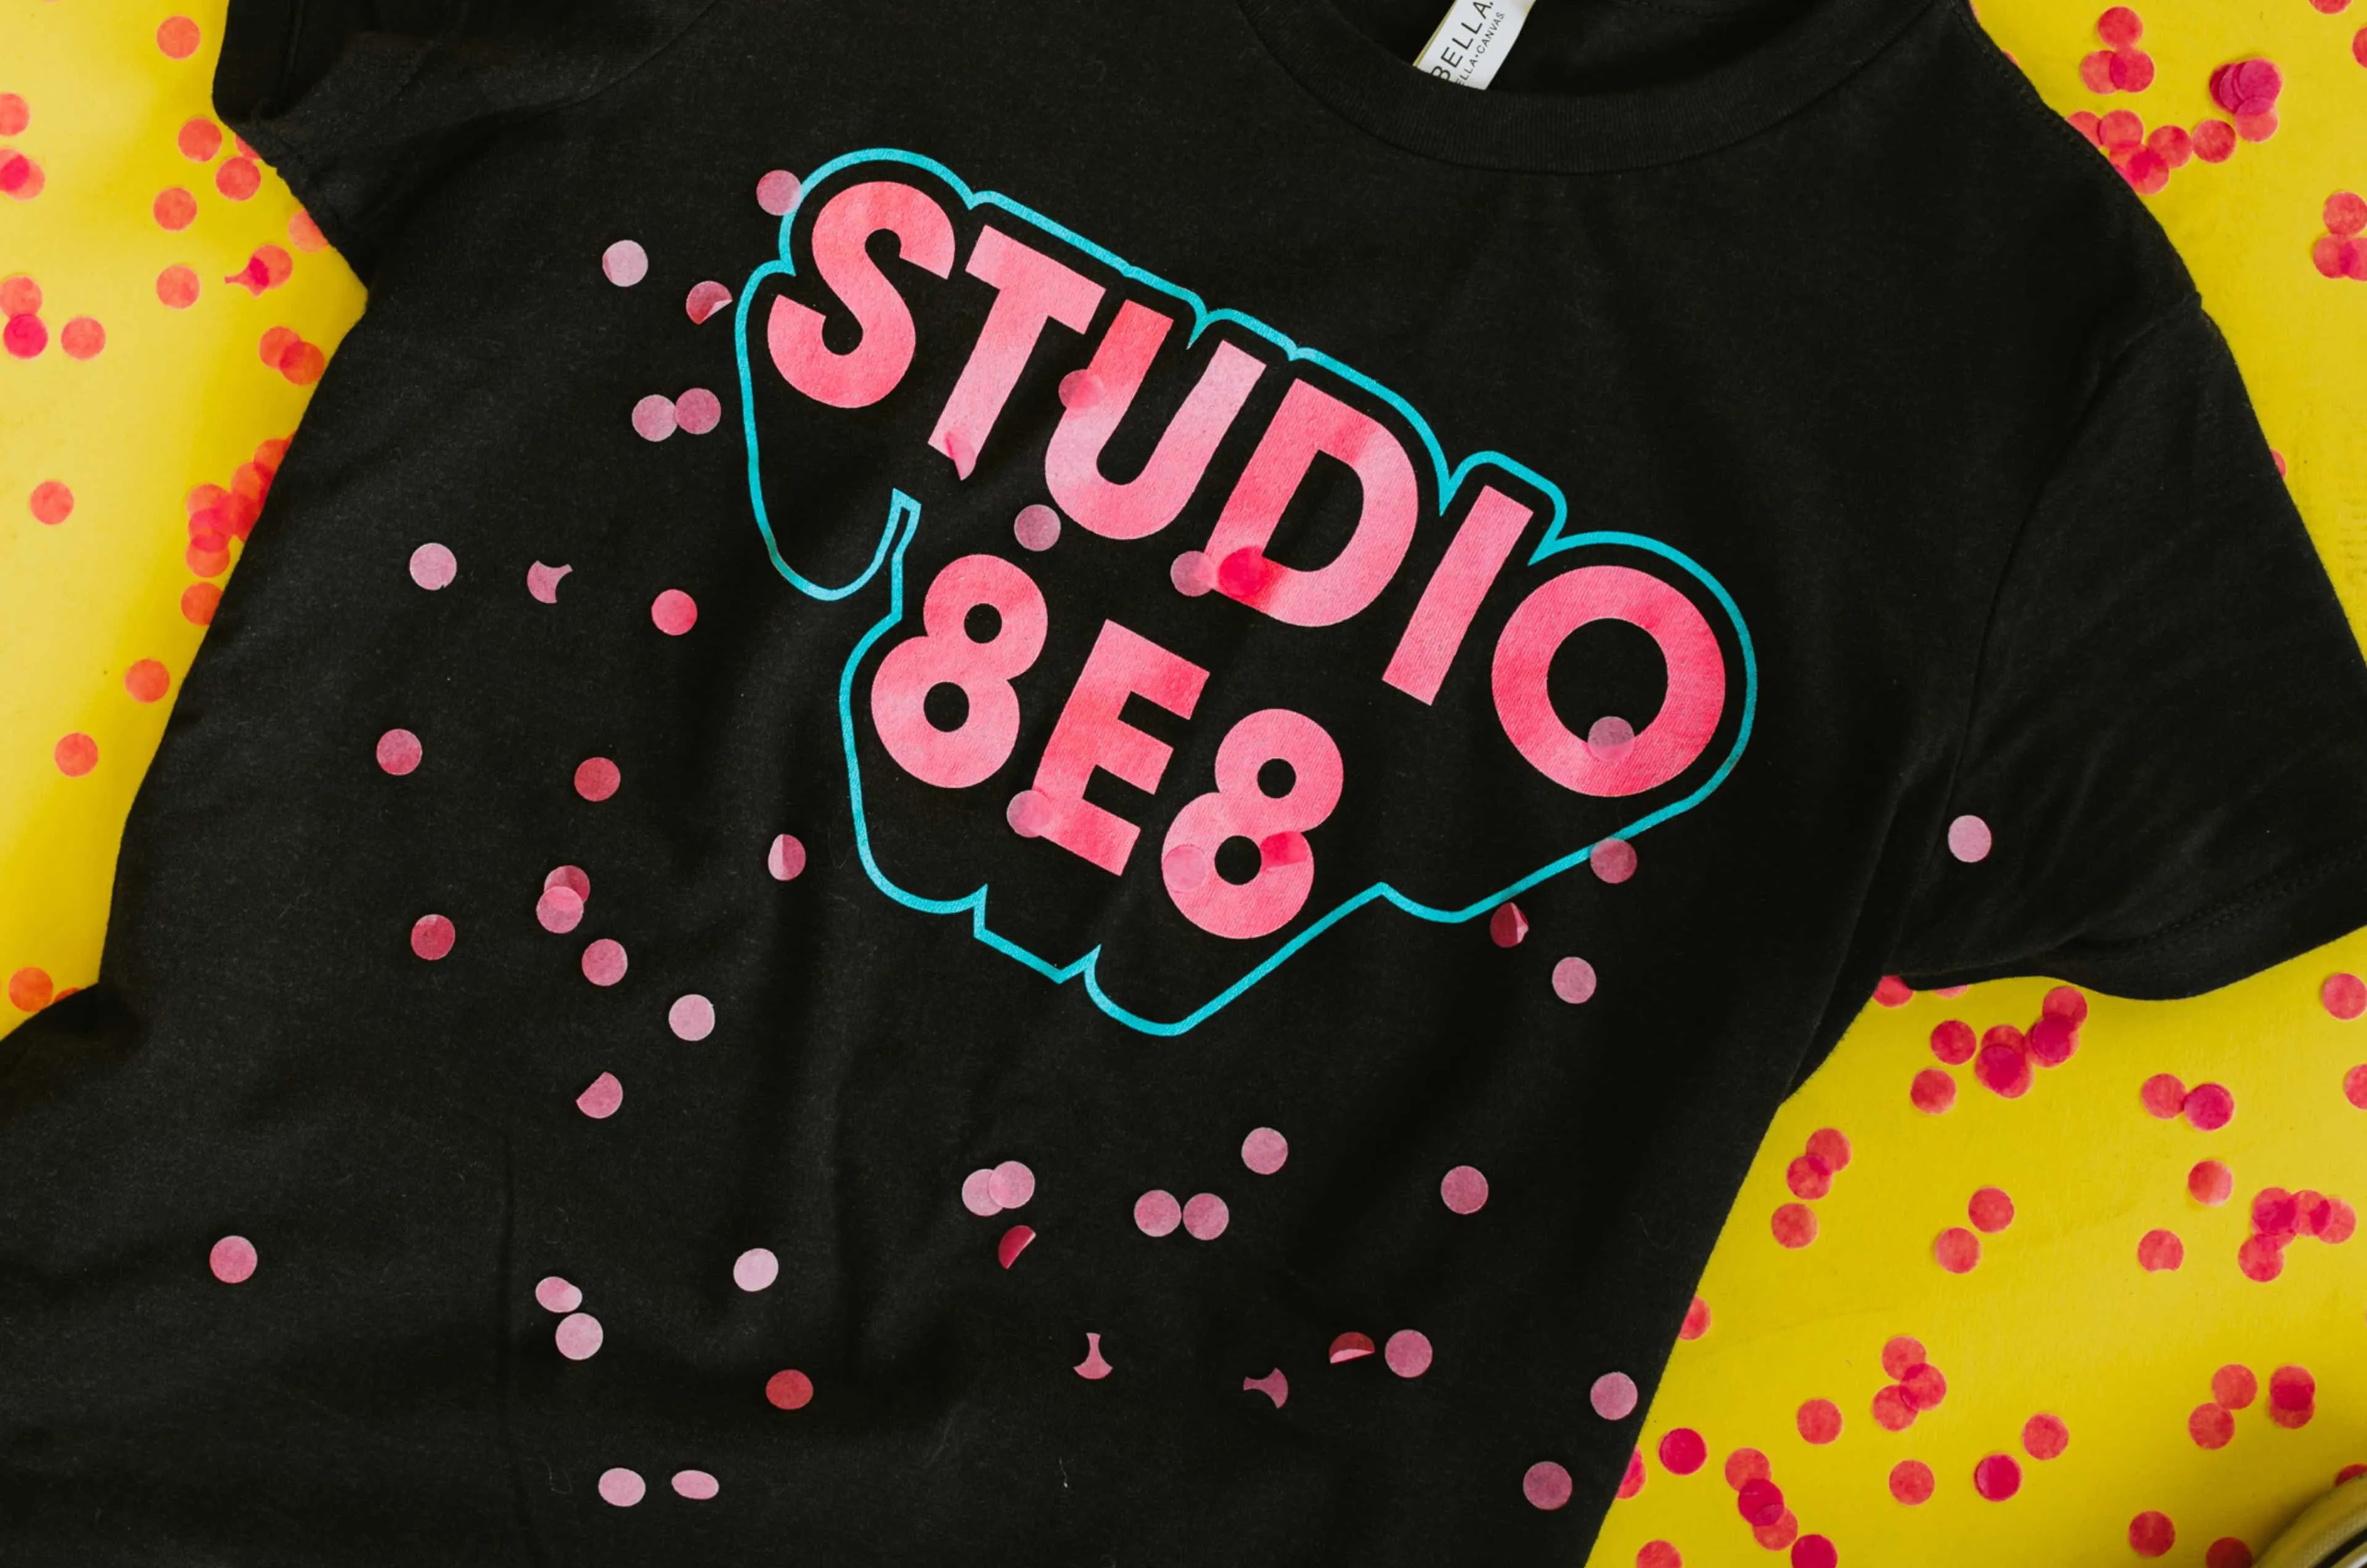 Photo of a dark gray shirt with Studio 8E8 printed on it in pink letters with a blue outline